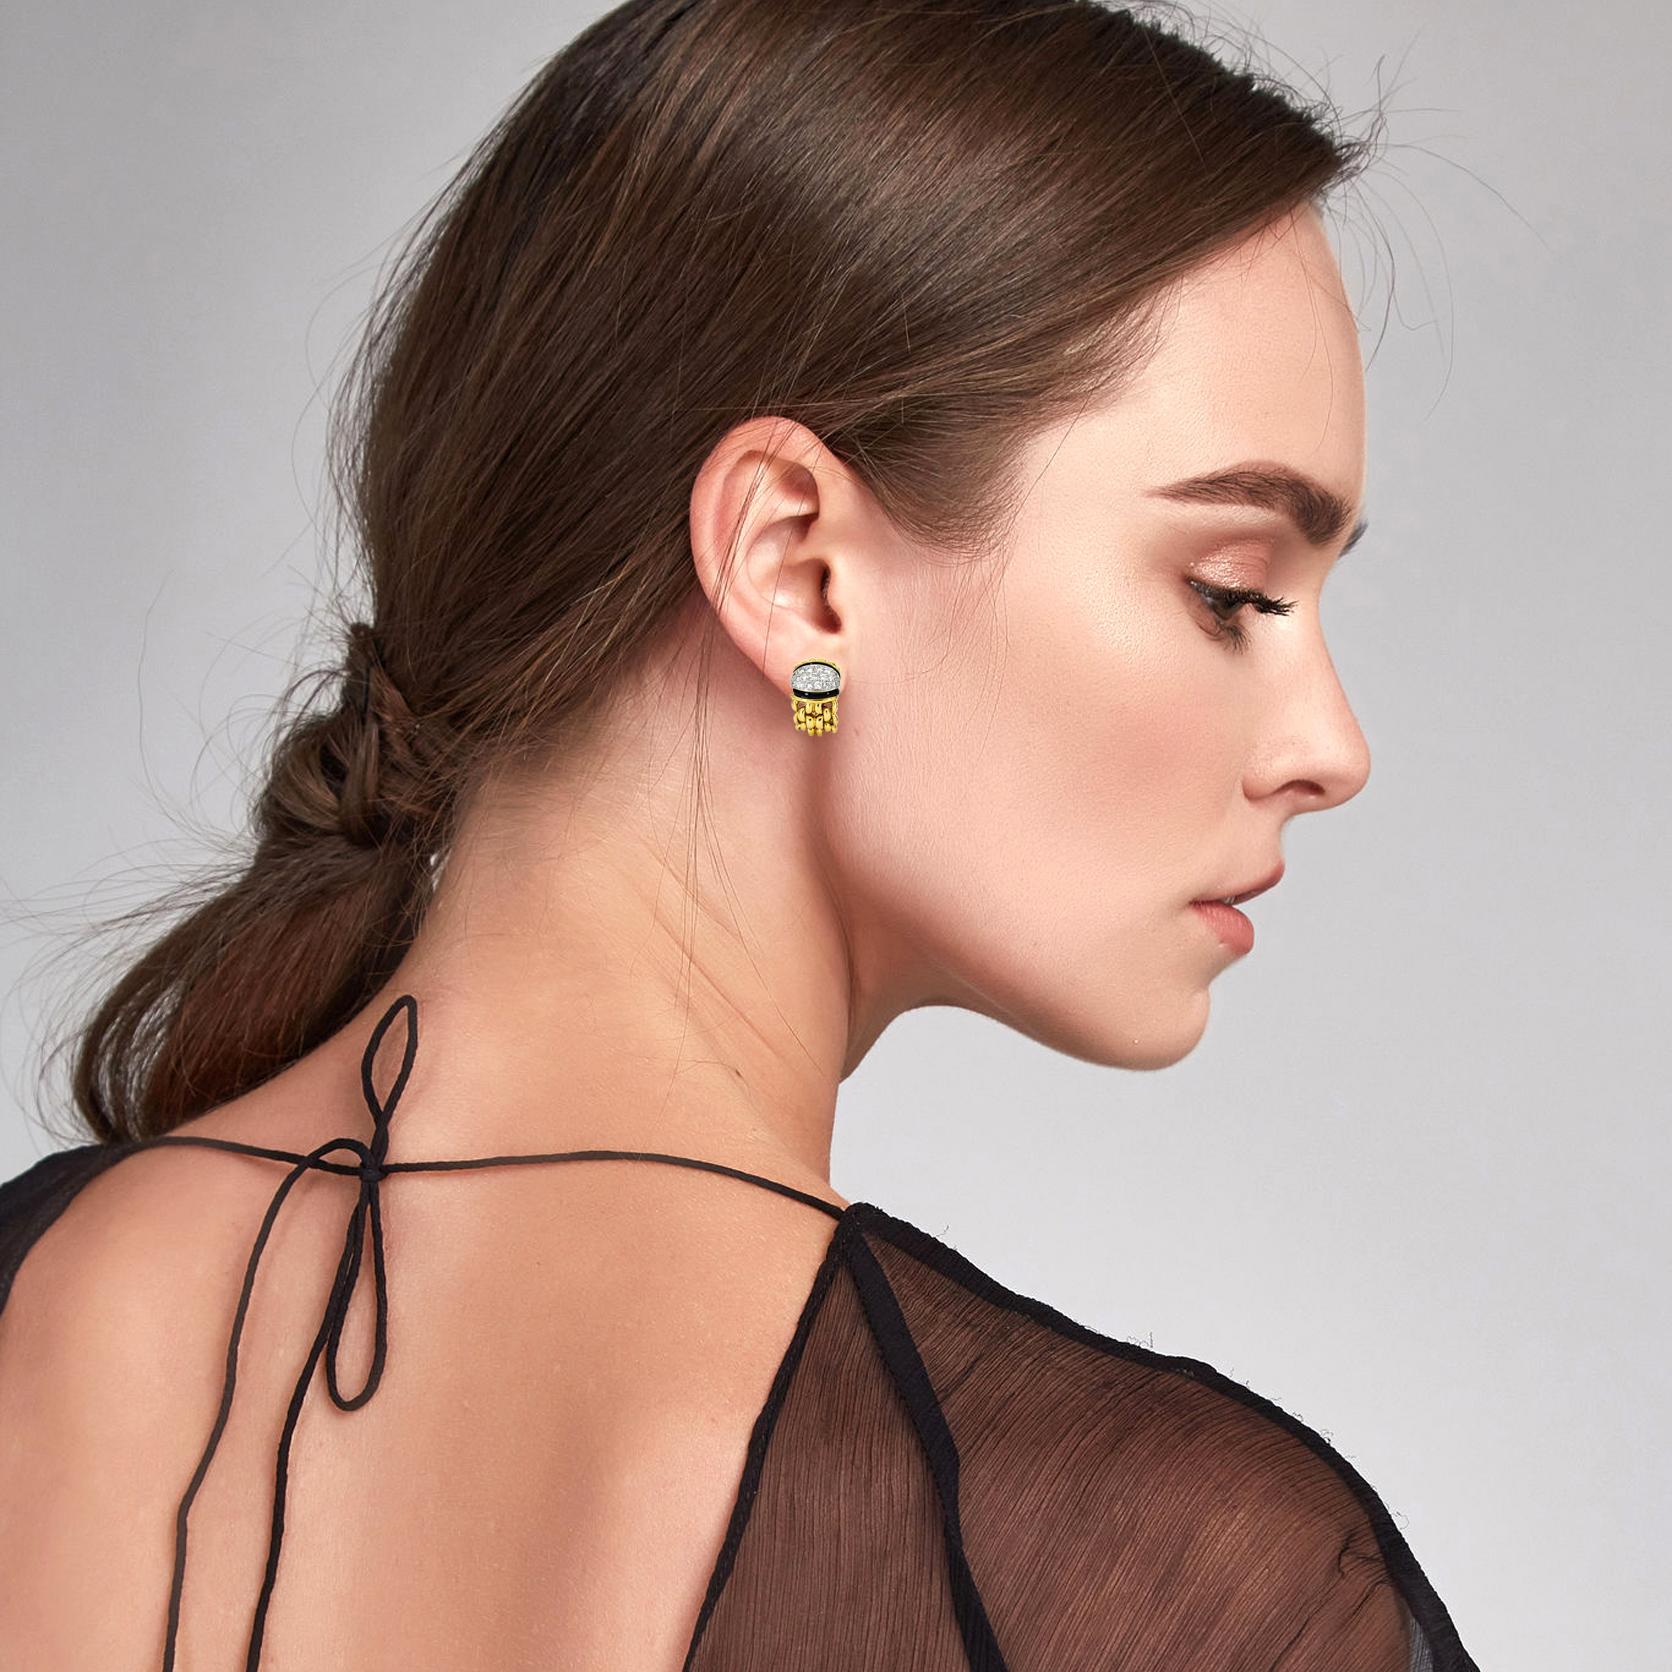 Diamond and onyx earrings crafted in 18-karat yellow gold. The earrings have 38 round-cut diamonds and black onyx gemstones. Heavy chain design half hoop earrings with omega backs. 

Size, Medium
Height, 21mm
Width, 13.5mm
Depth, 6.6mm
Weight, 24.2